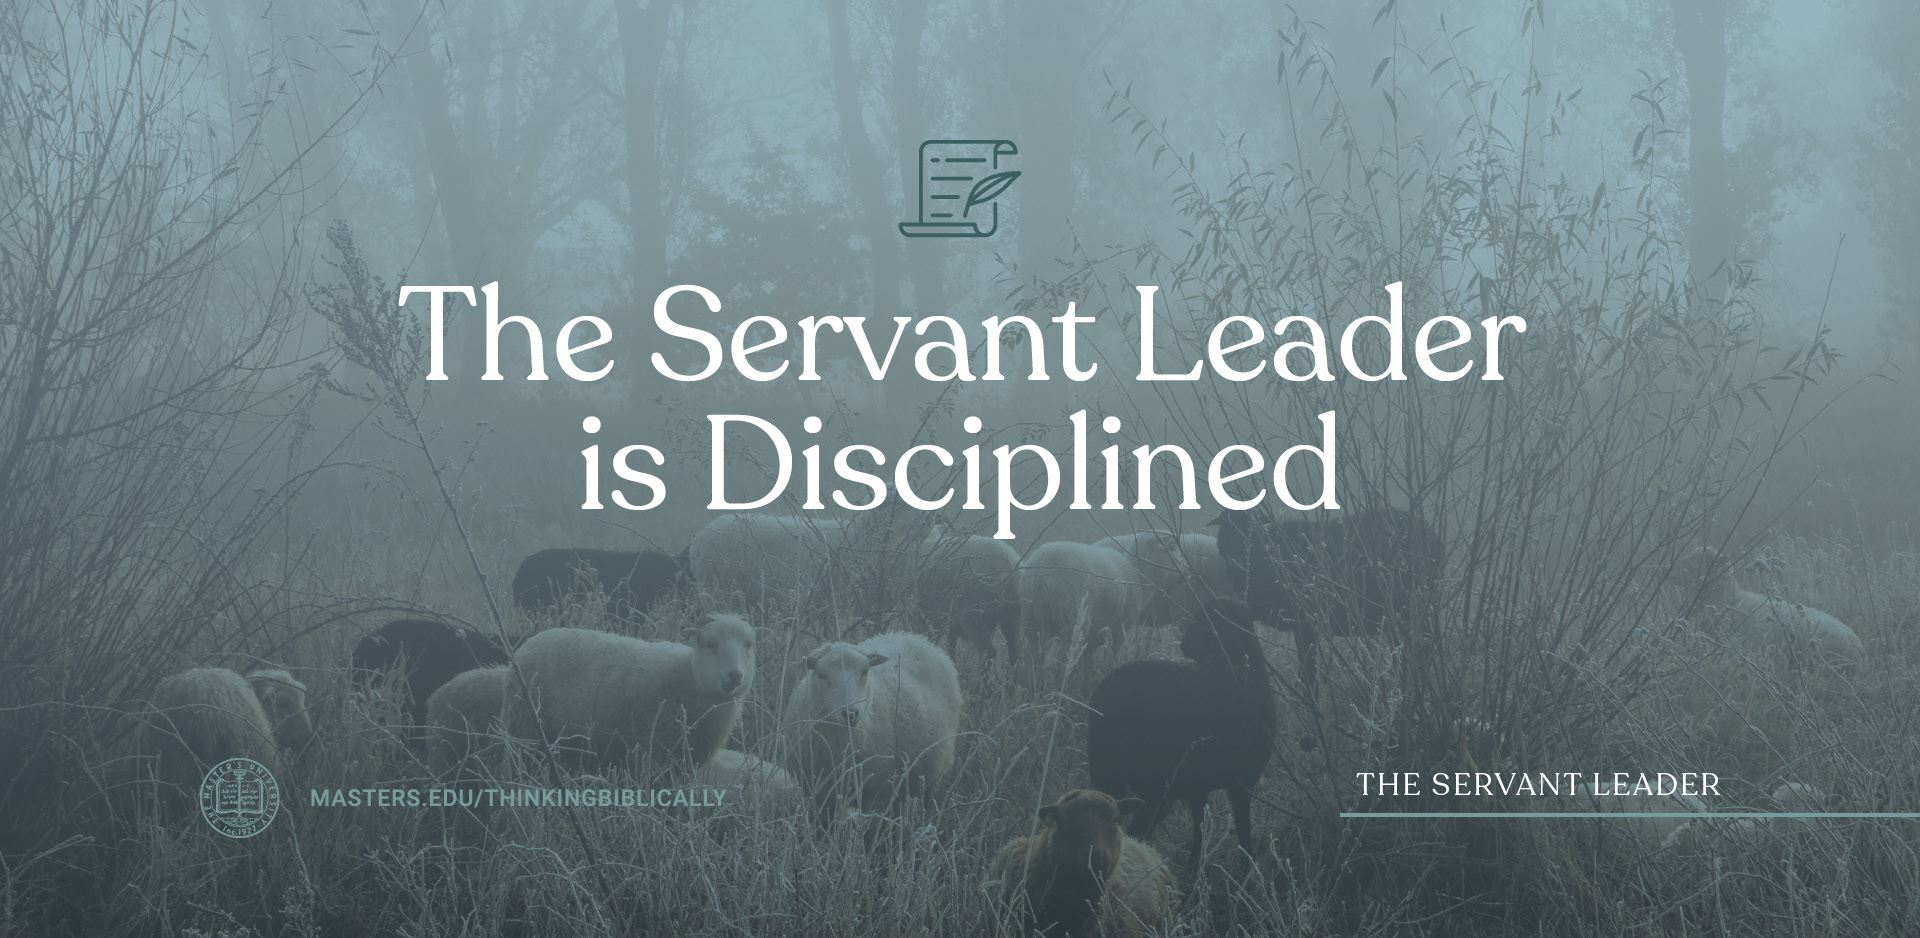 The Servant Leader is Disciplined